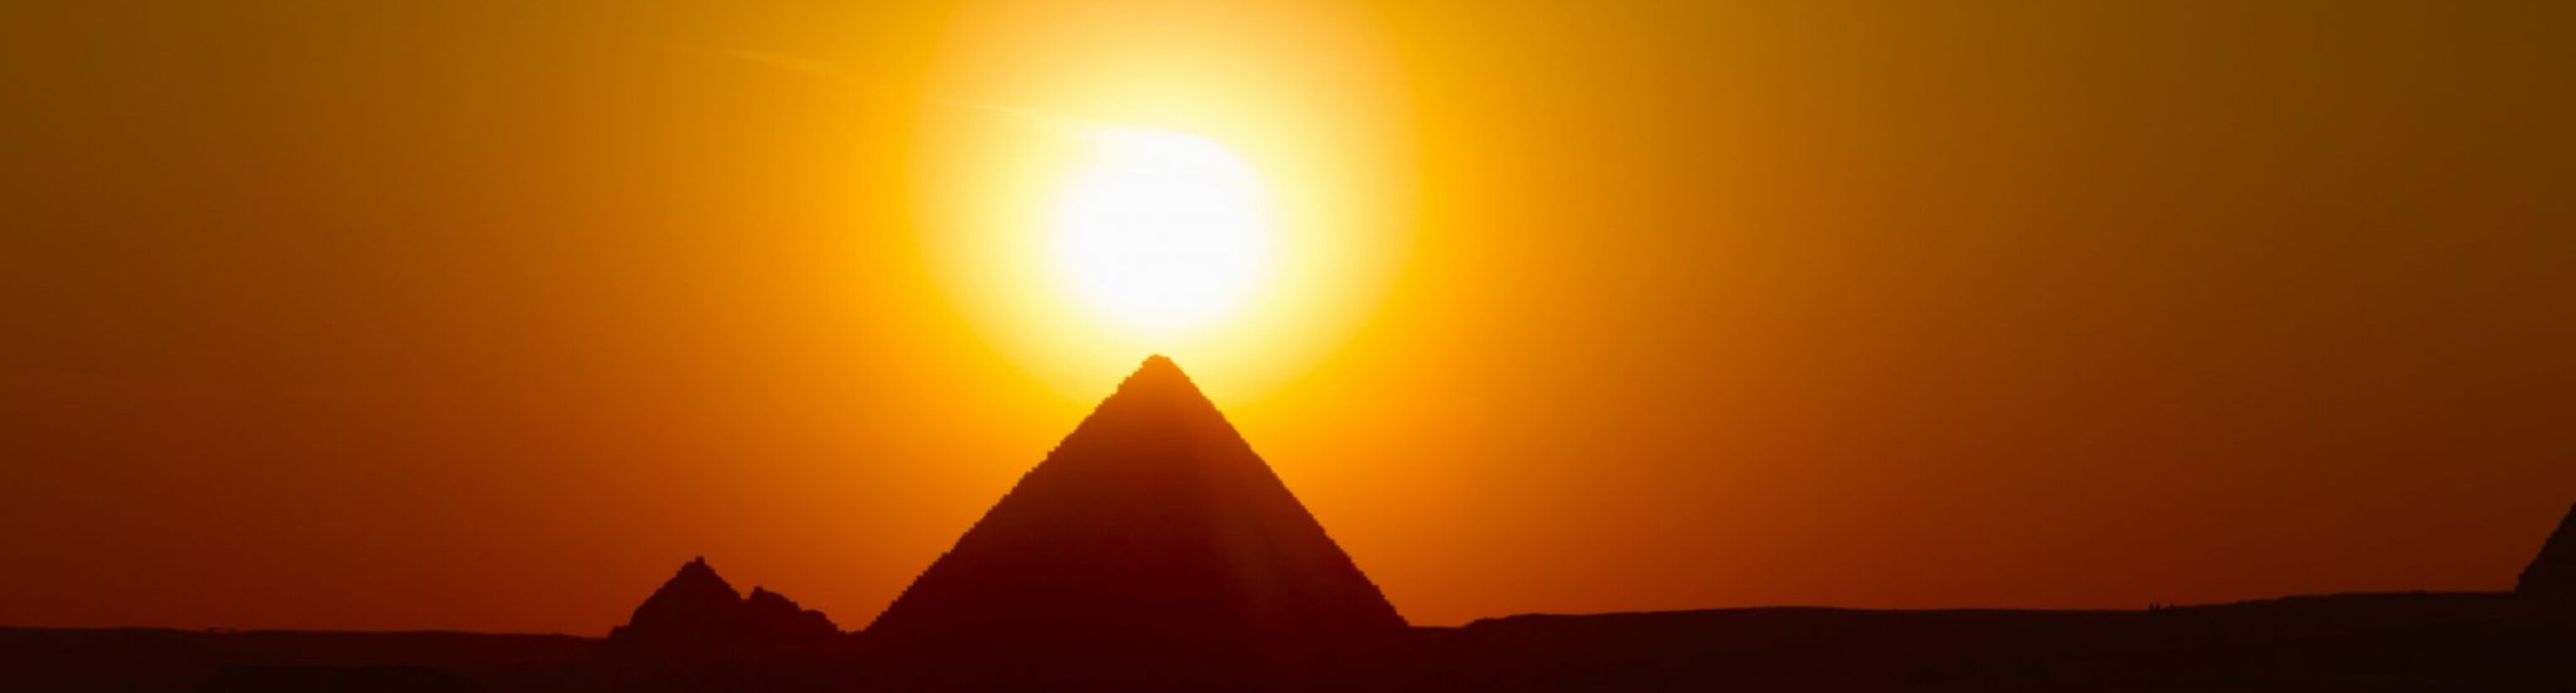 A pyramid in Egypt with the sun setting behind it